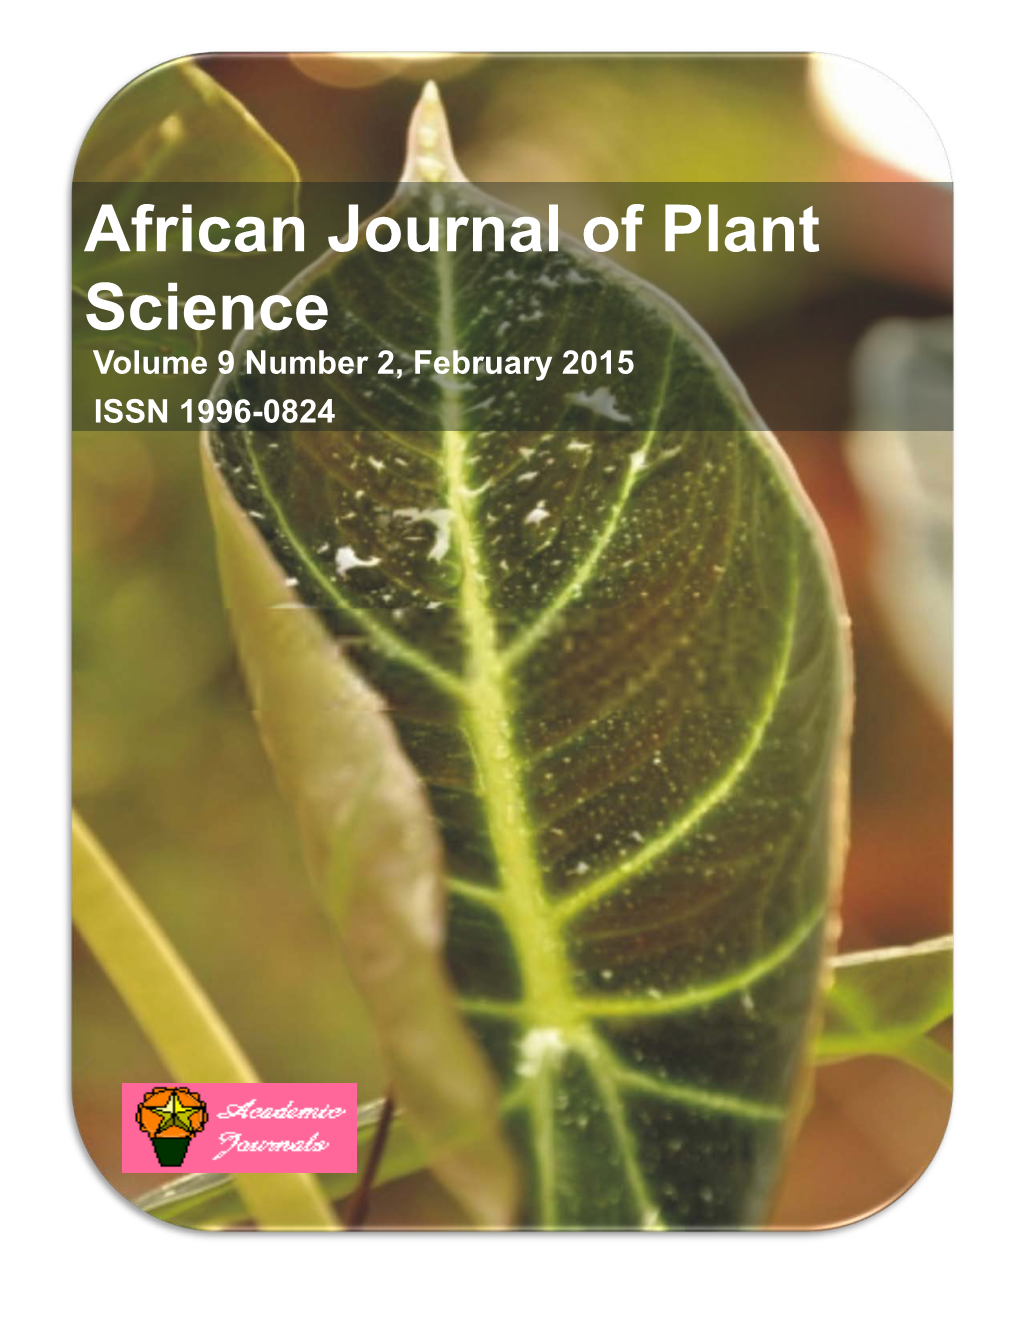 African Journal of Plant Science Volume 9 Number 2, February 2015 ISSN 1996-0824